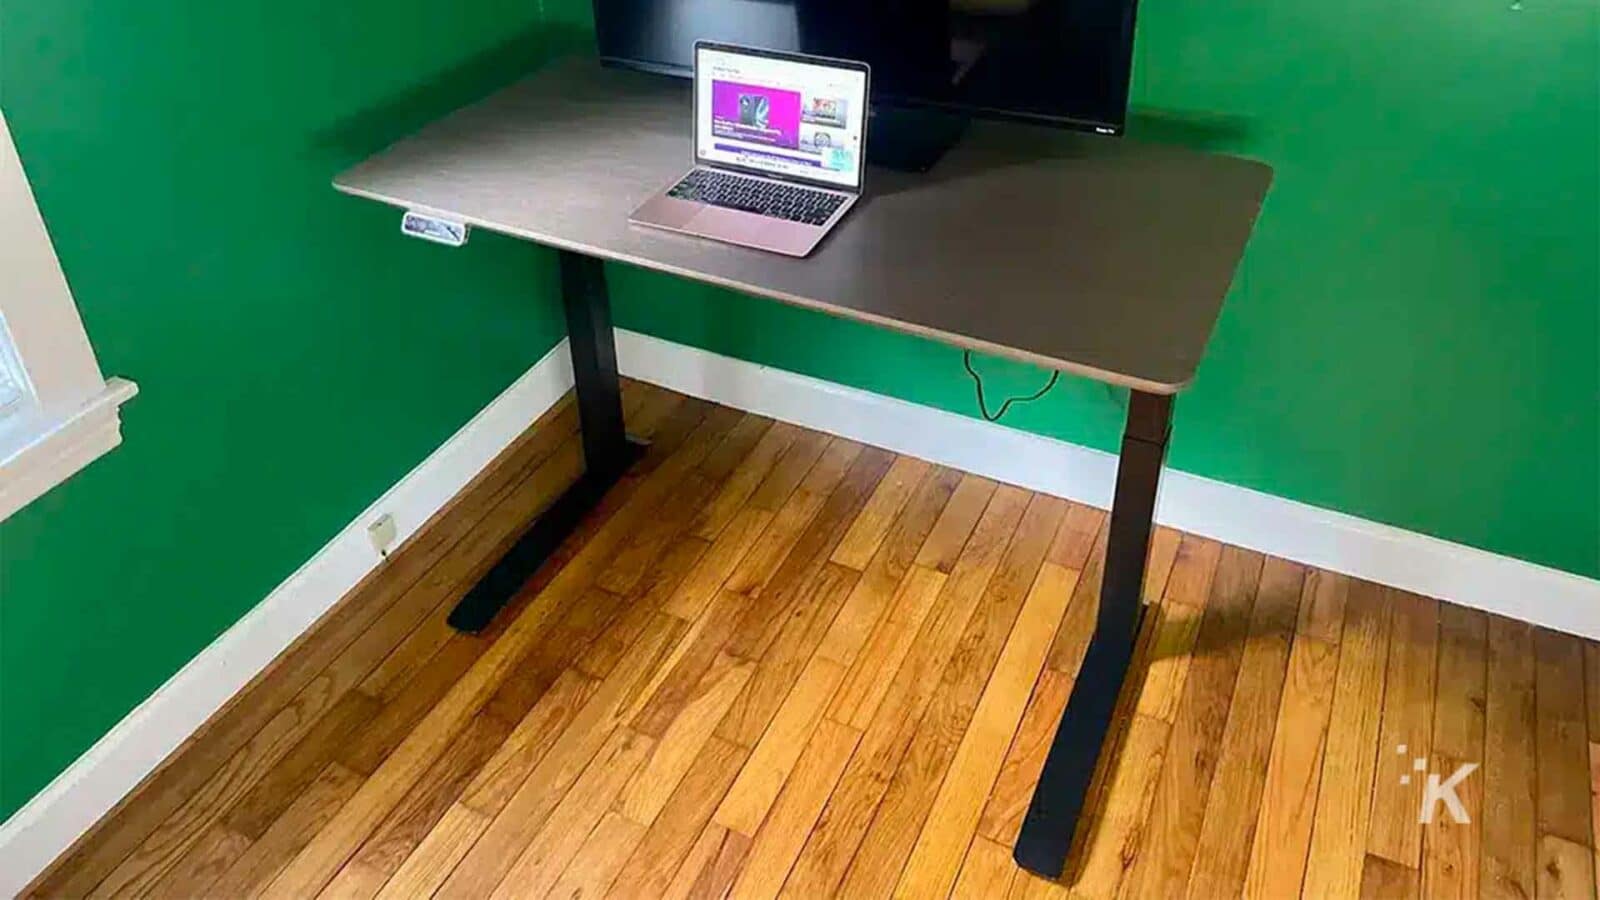 The laptop sits on the table.Flexisport E7 Premium standing desk